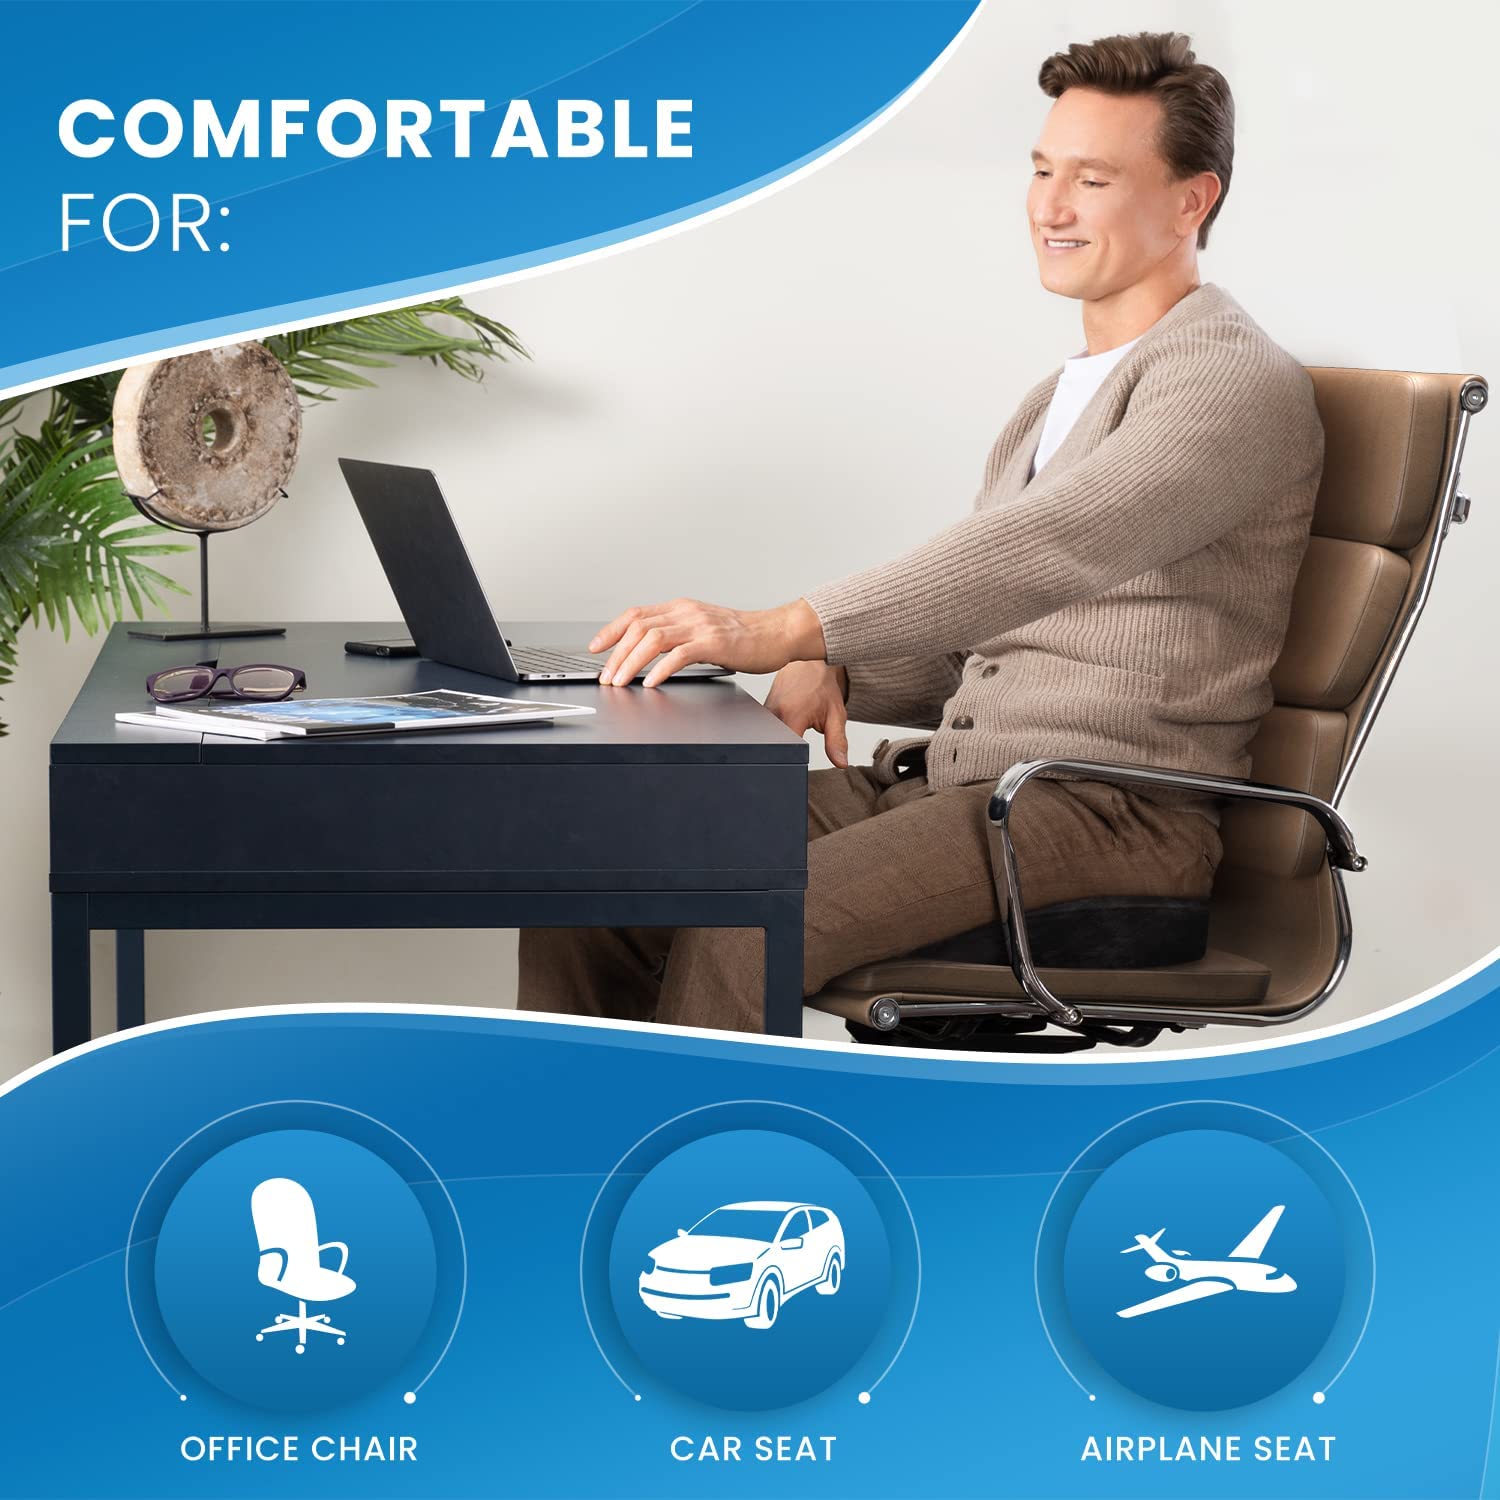 Everlasting Comfort Memory Foam Seat Cushion with Removable Cover